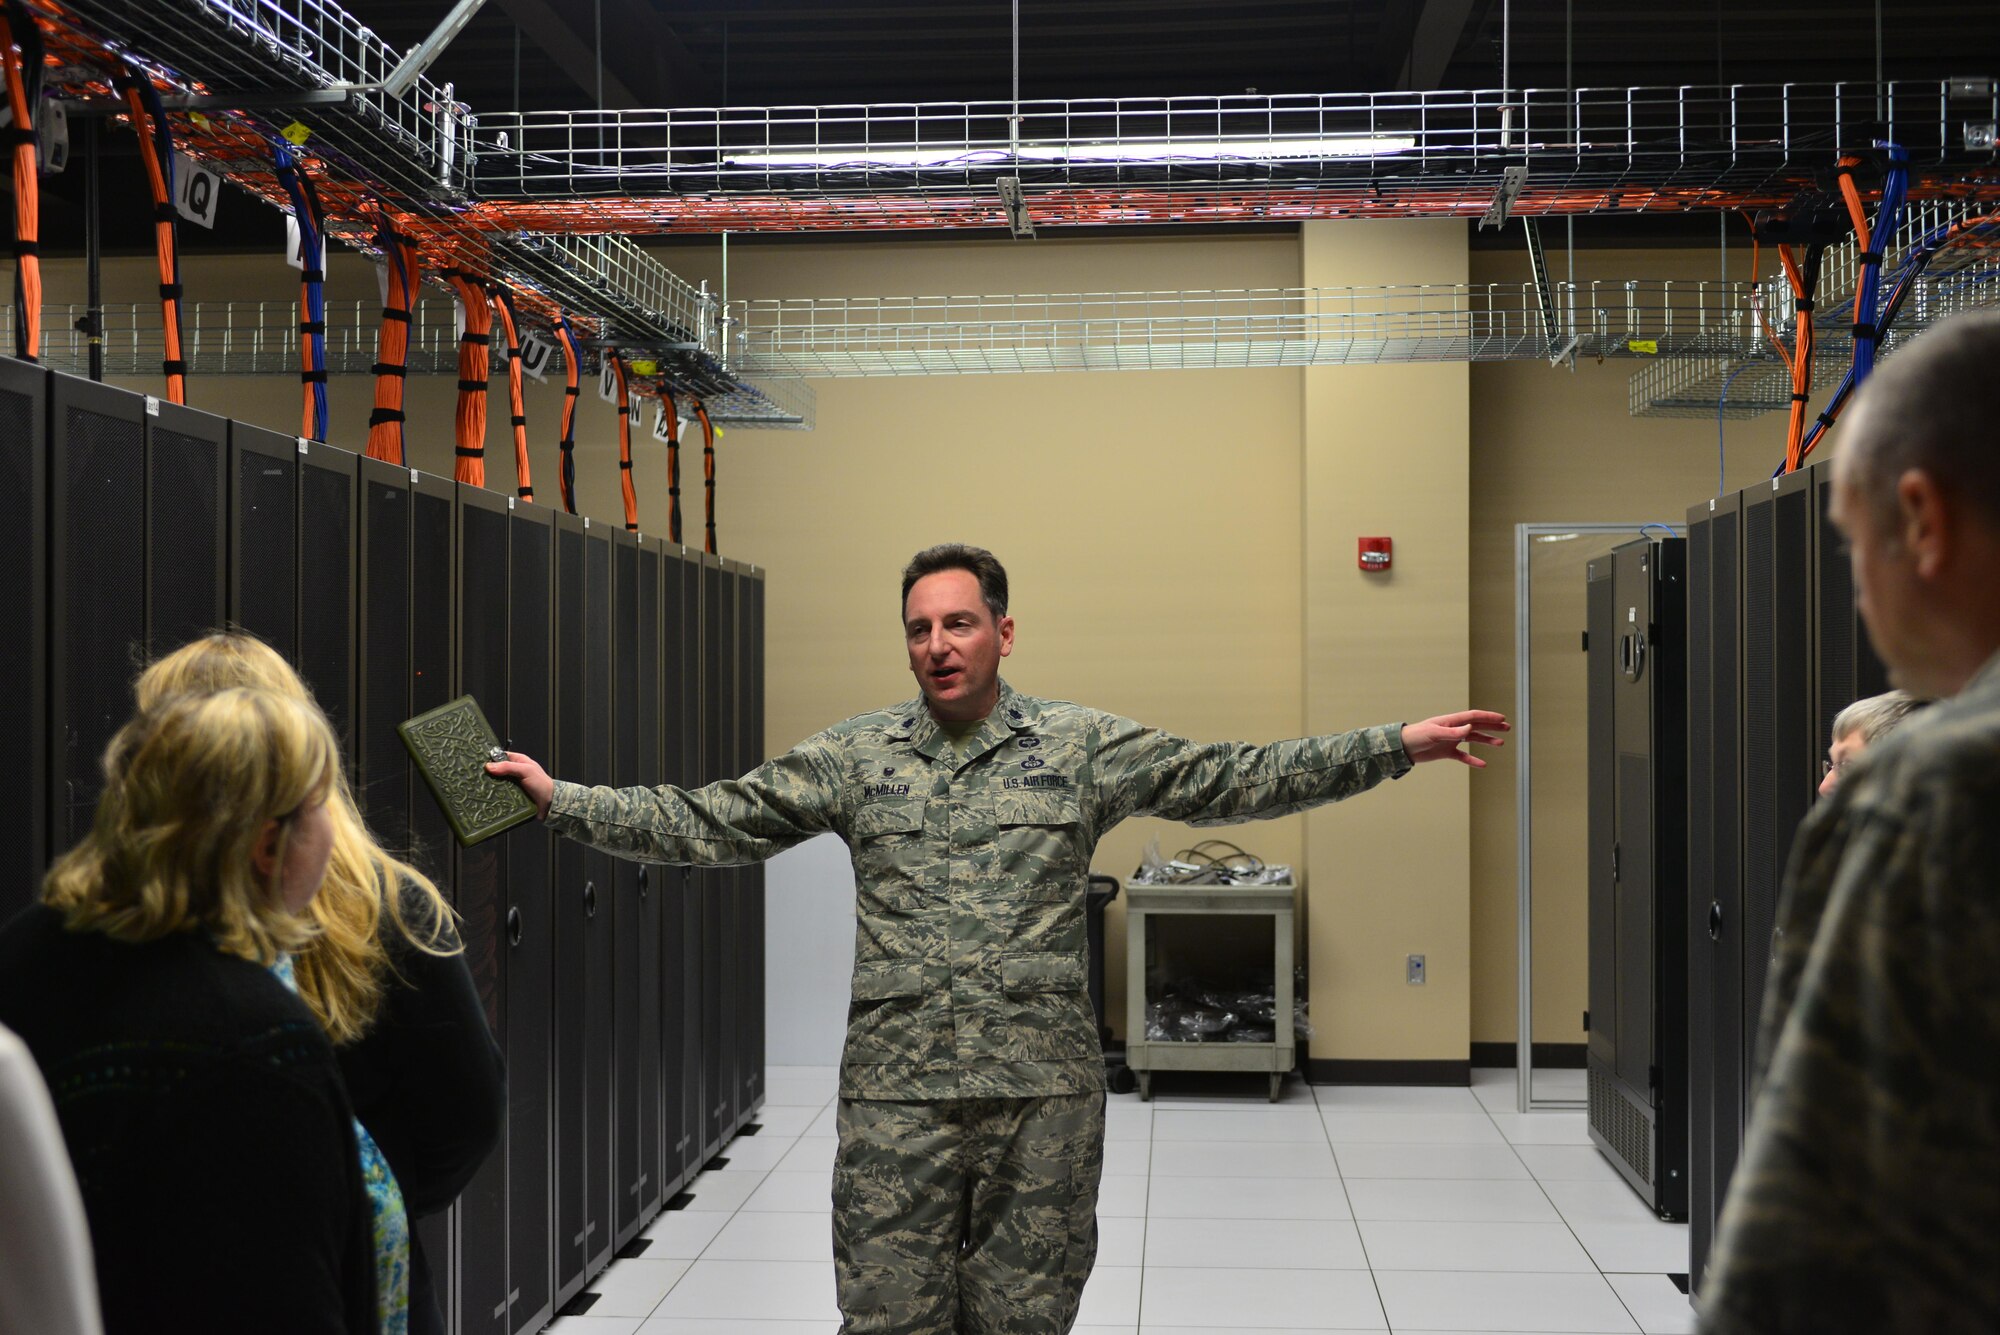 Lt. Col. John McMillen, commander of the 2nd Systems Operations Squadron, gives a tour of the  High-Performance Computing Center in the 557th Weather Wing at Offutt Air Force Base, Neb., to spouses and service members during the Spouses Town Hall Nov. 1, 2016. The town hall, which included briefings on the Key Spouses program, a meet and greet with wing leadership and a tour of the 557th WW facilities, gave spouses a greater understanding of the 557th WW mission. (U.S. Air Force photo/Senior Airman Rachel Hammes)